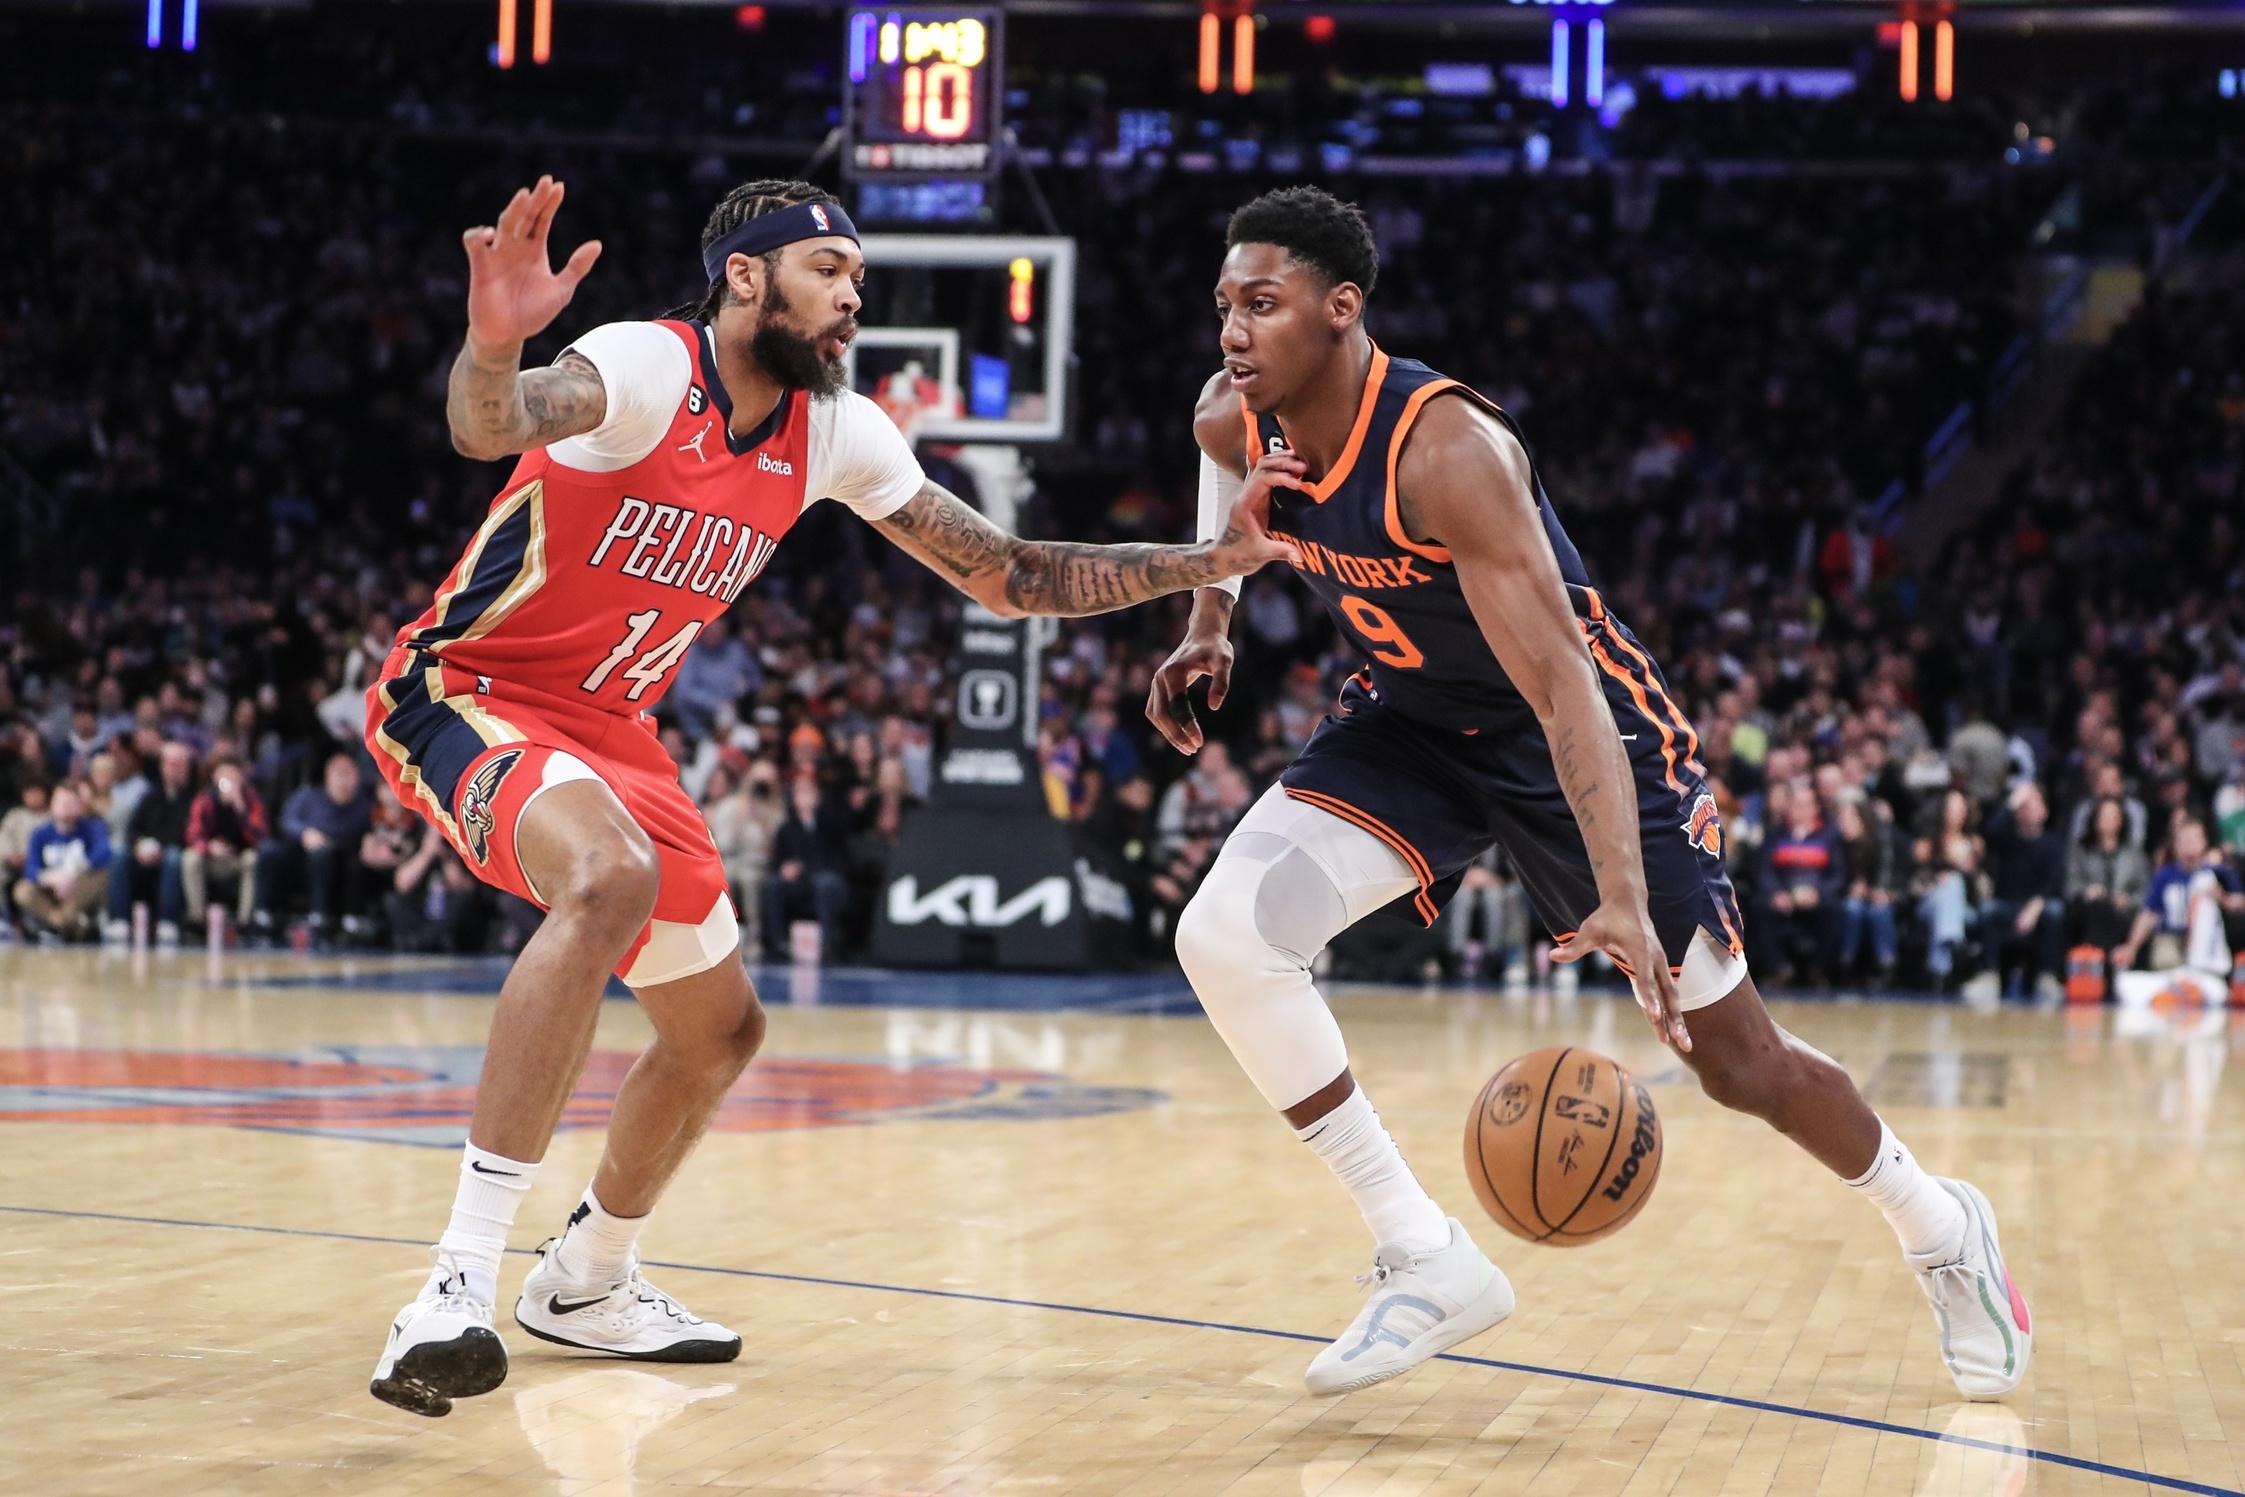 New York Knicks guard RJ Barrett (9) looks to drive past New Orleans Pelicans forward Brandon Ingram (14) in the first quarter at Madison Square Garden. / Wendell Cruz-USA TODAY Sports